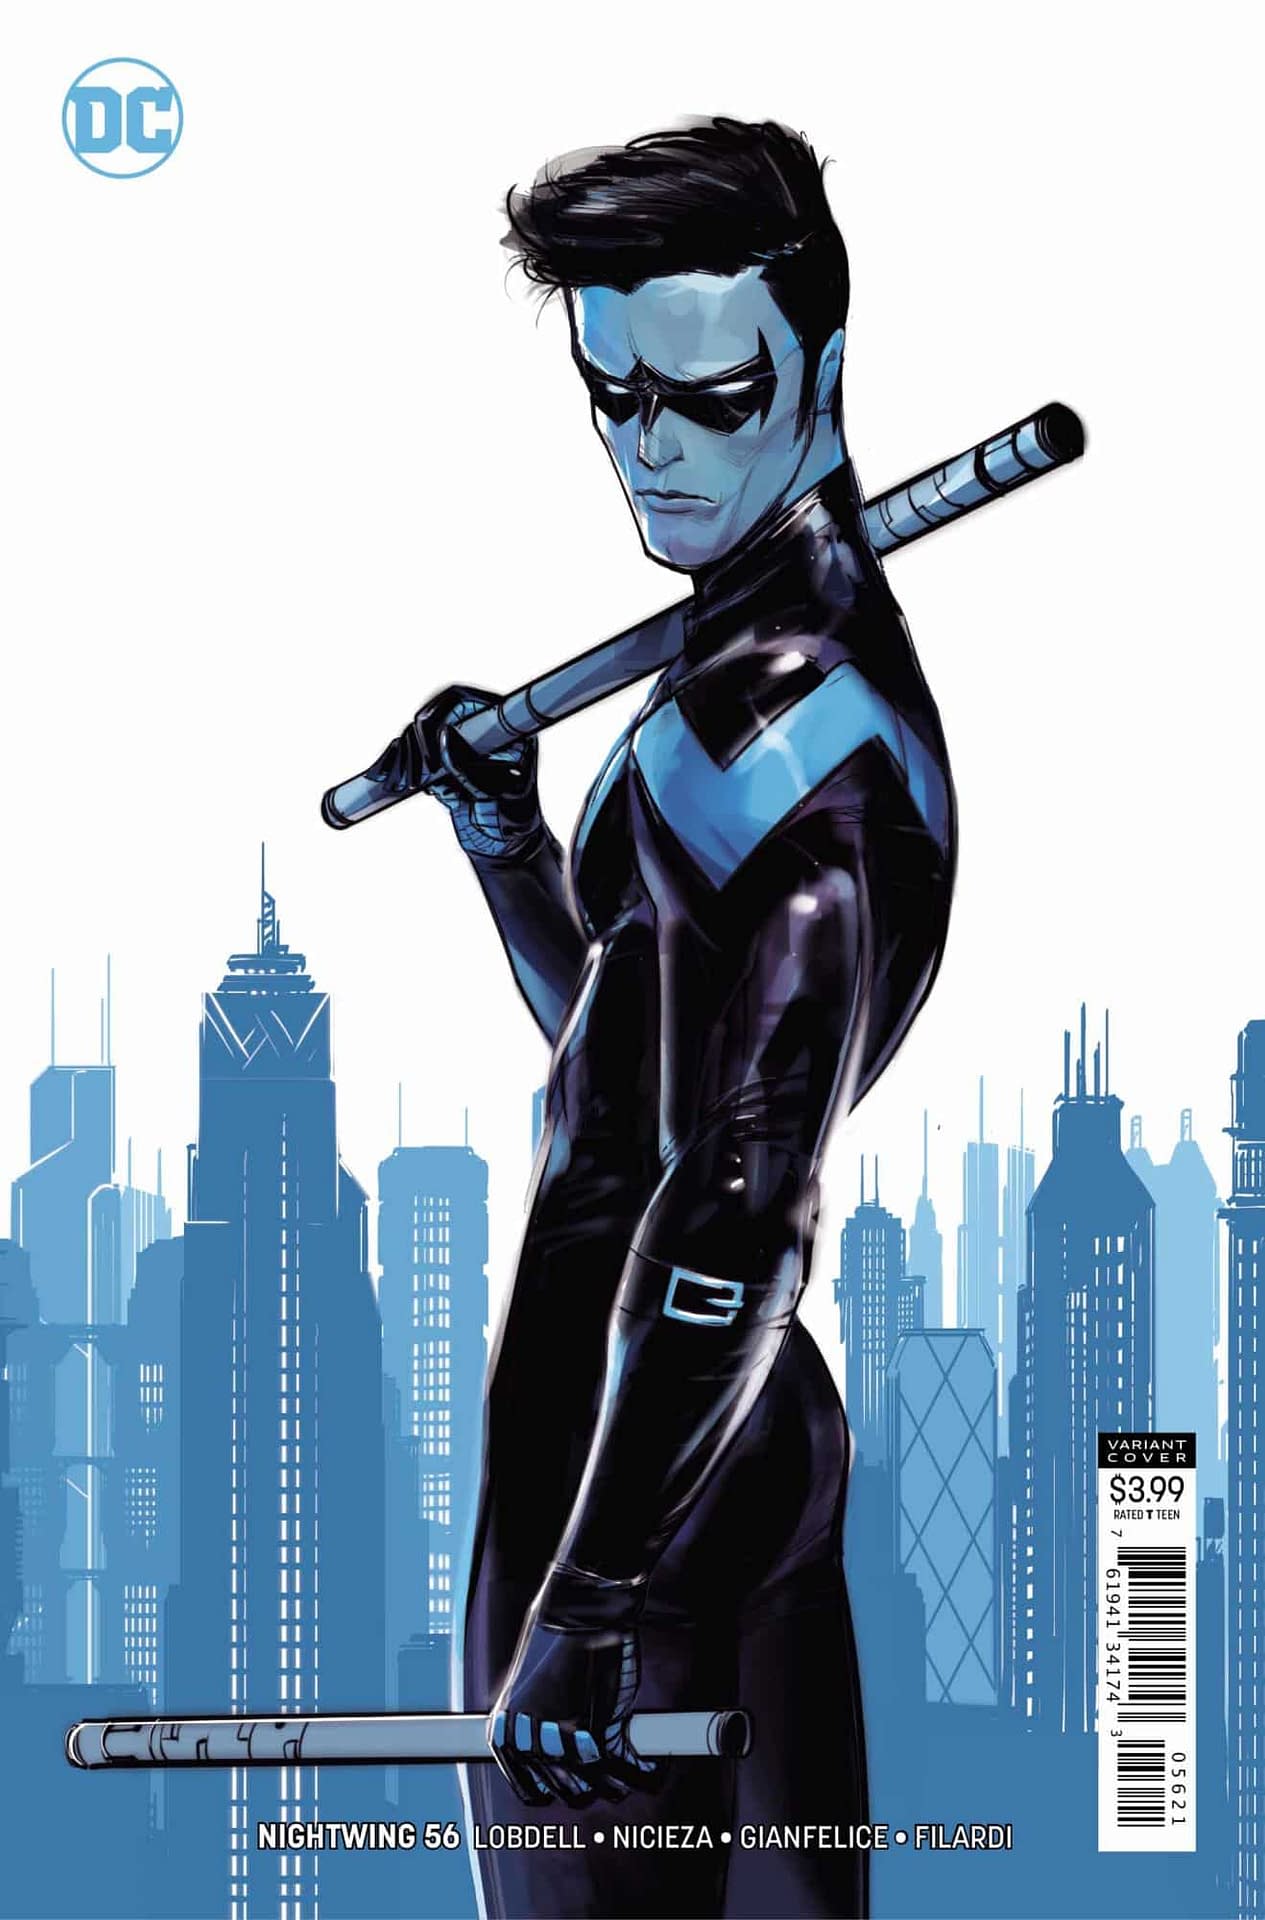 Nightwings vs. the People in Wednesday's Nightwing #56